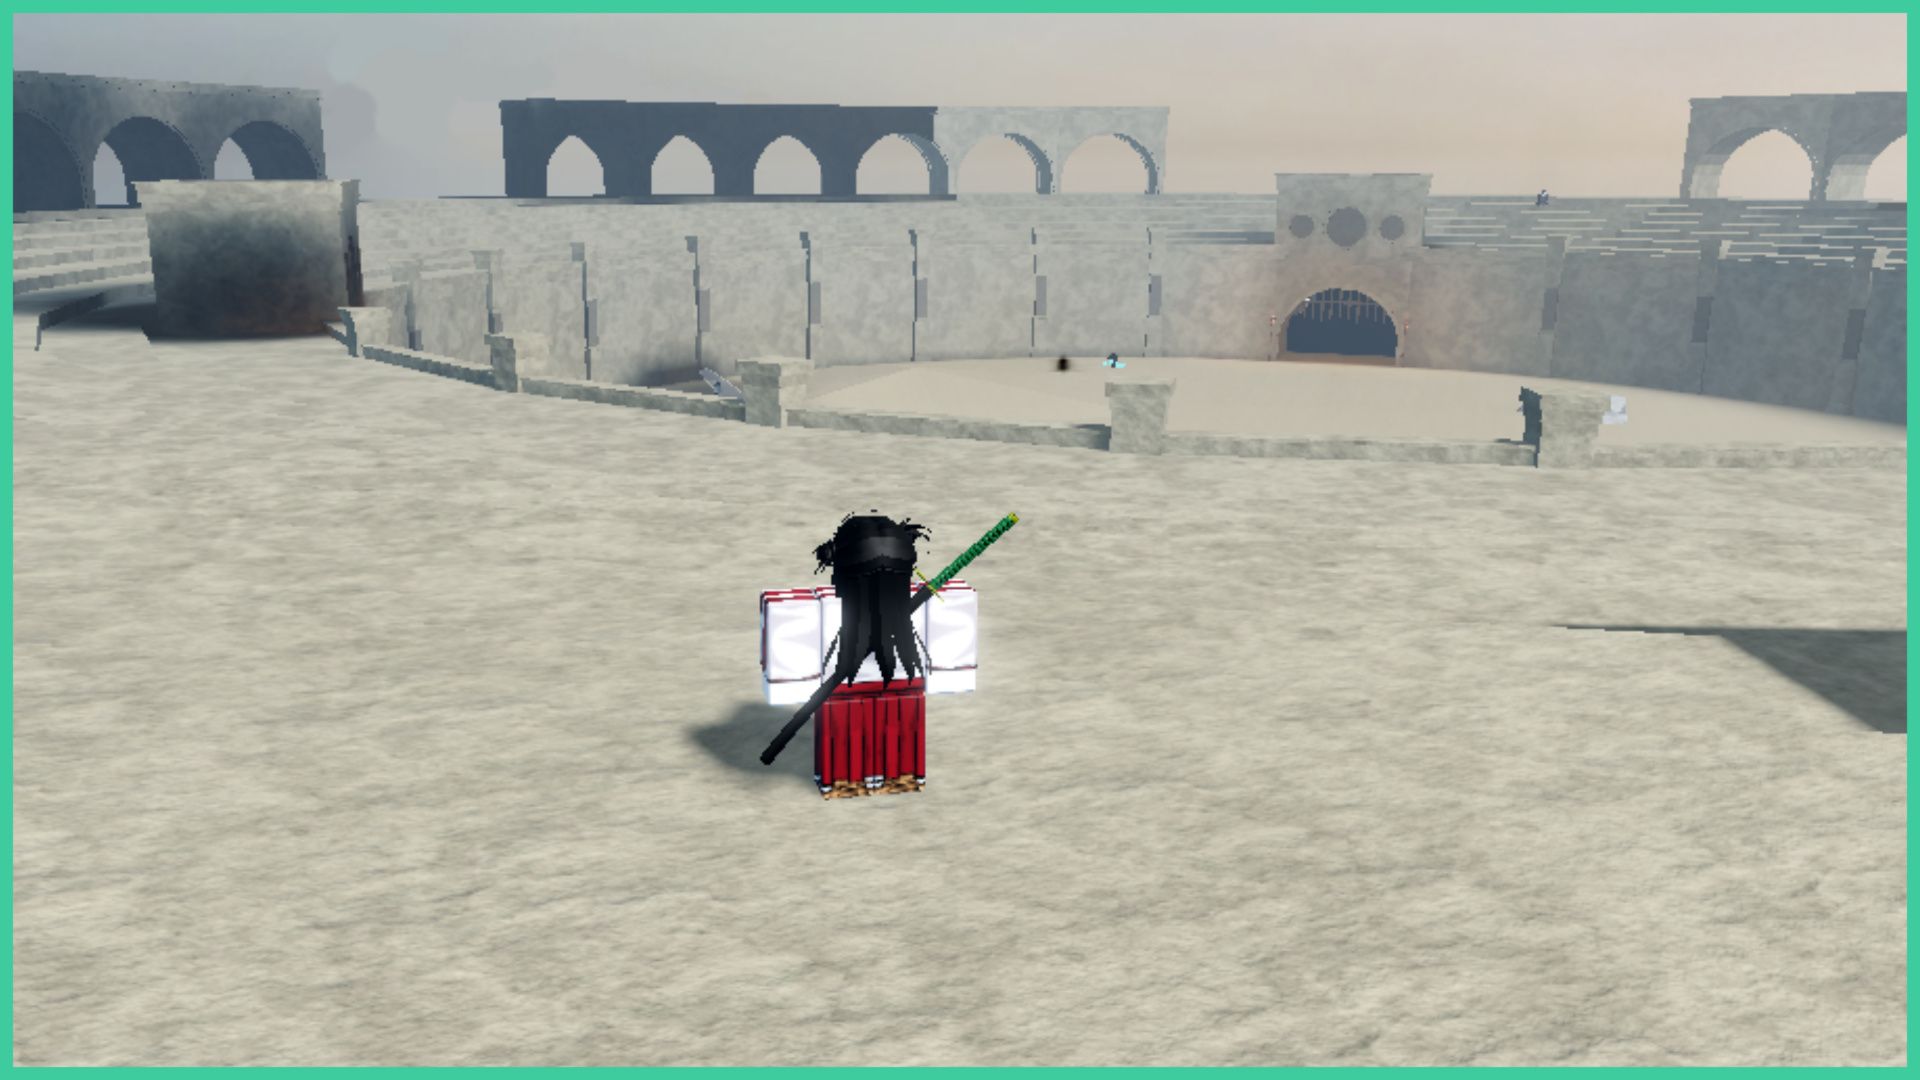 feature image for our best cero path type soul guide, the image is a screenshot of a roblox player with a katana on their back looking out over the colloseum arena, with a tunnel entranceway in the distance with the metal gate lifted, there are players battling in the main area of the arena